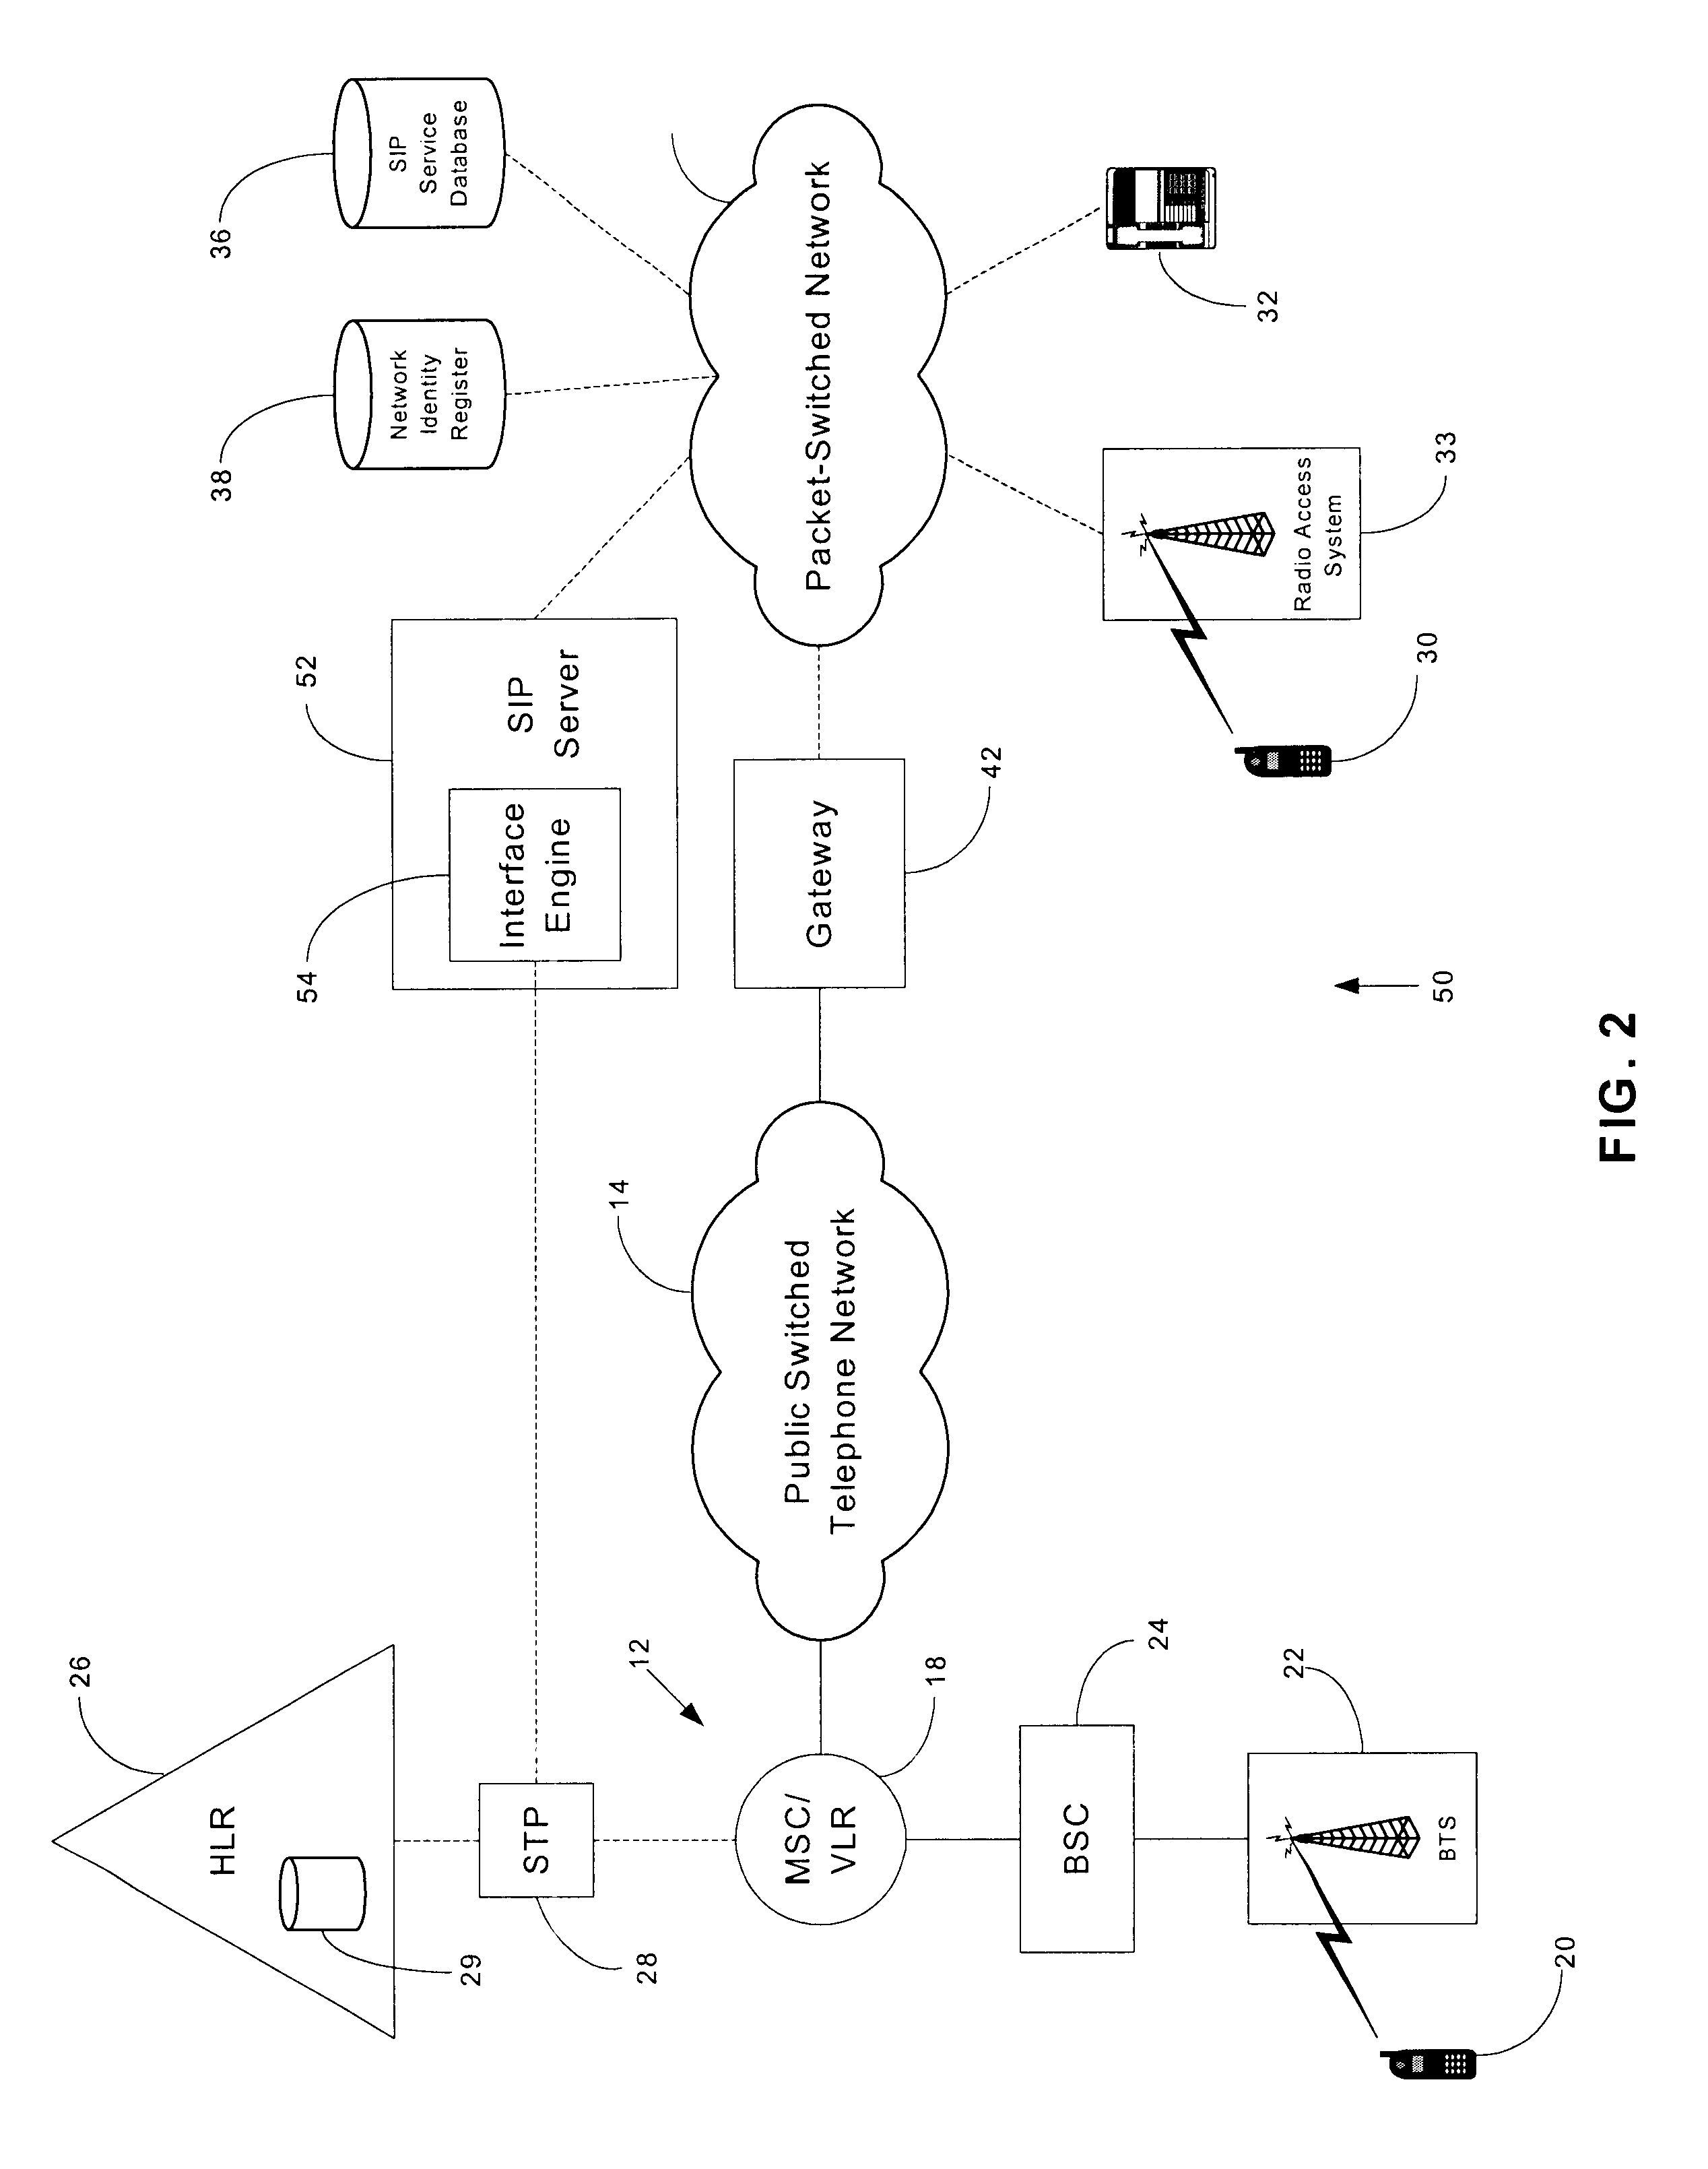 Method and system for interfacing a legacy circuit-switched network with a packet-switched network